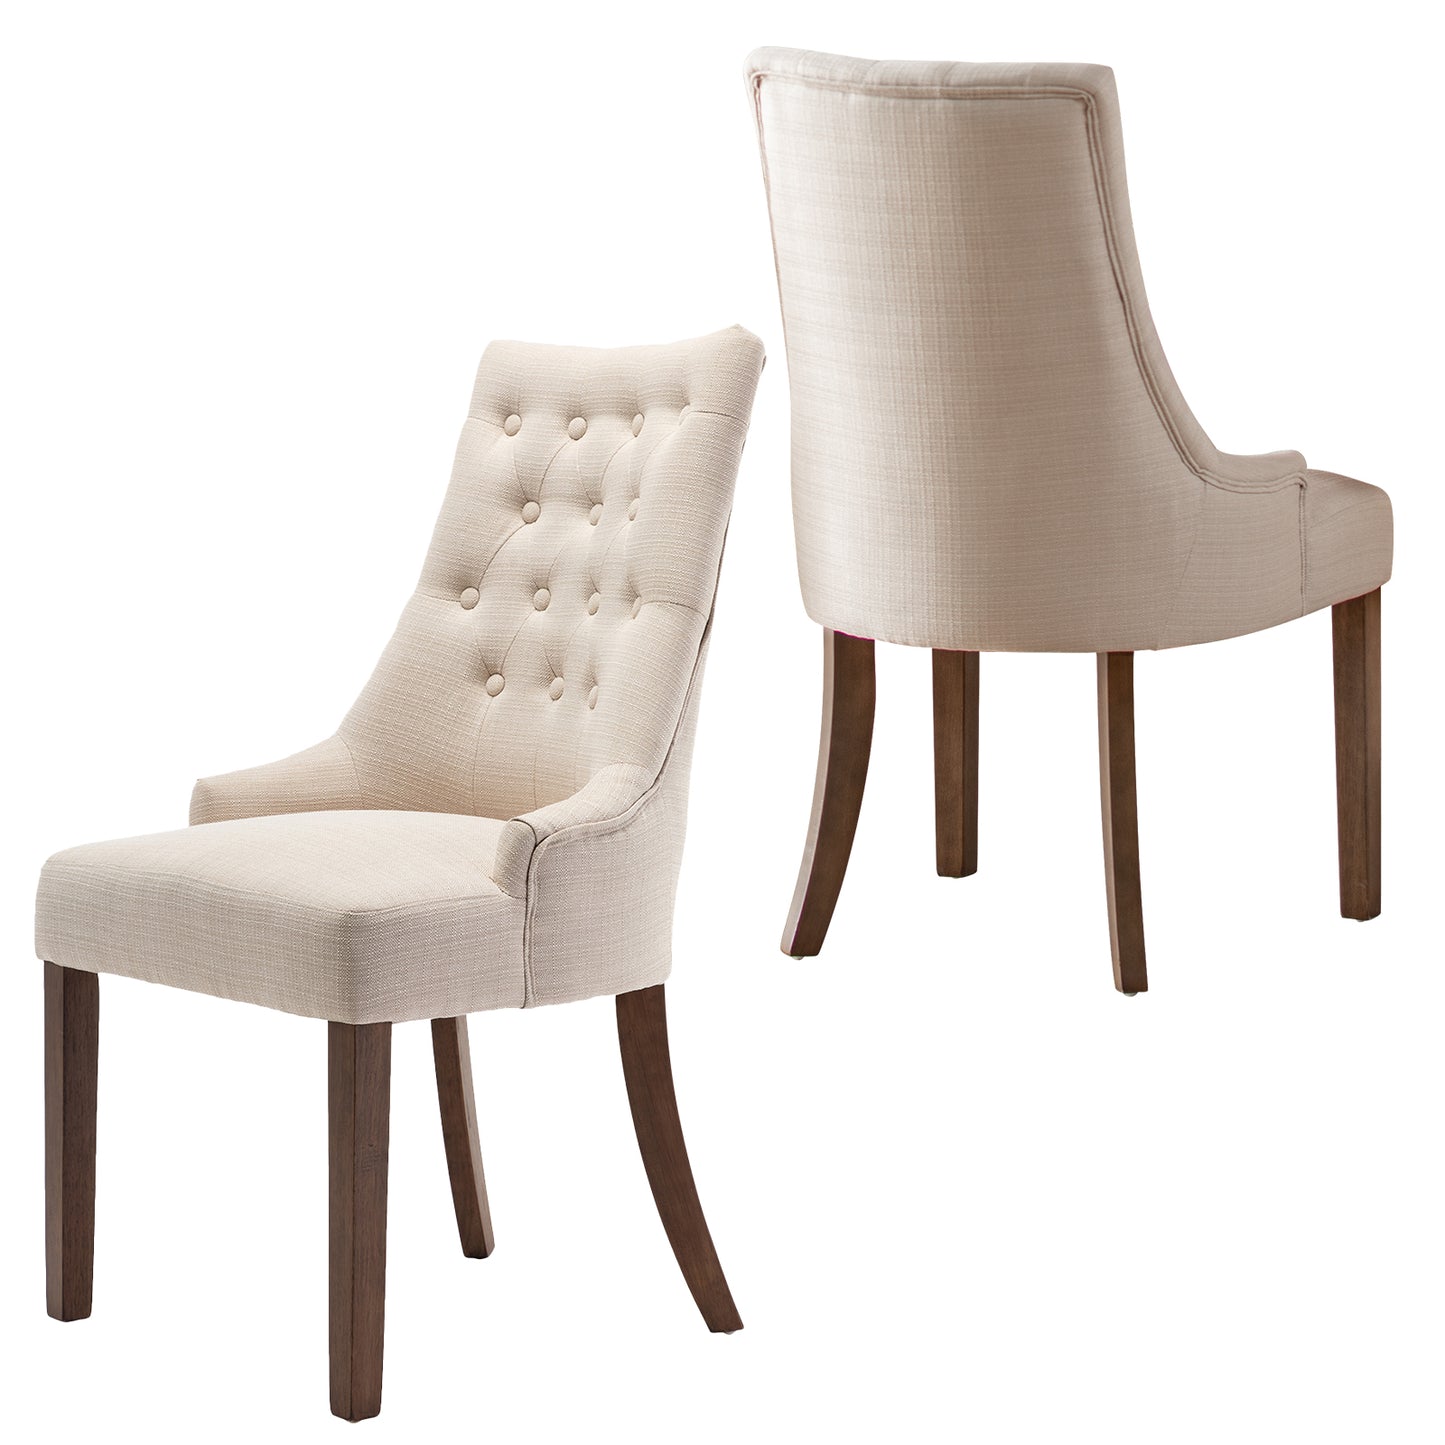 COLAMY Tufted Upholstered Dining Chair Beige Color Wingback Kitchen Chair